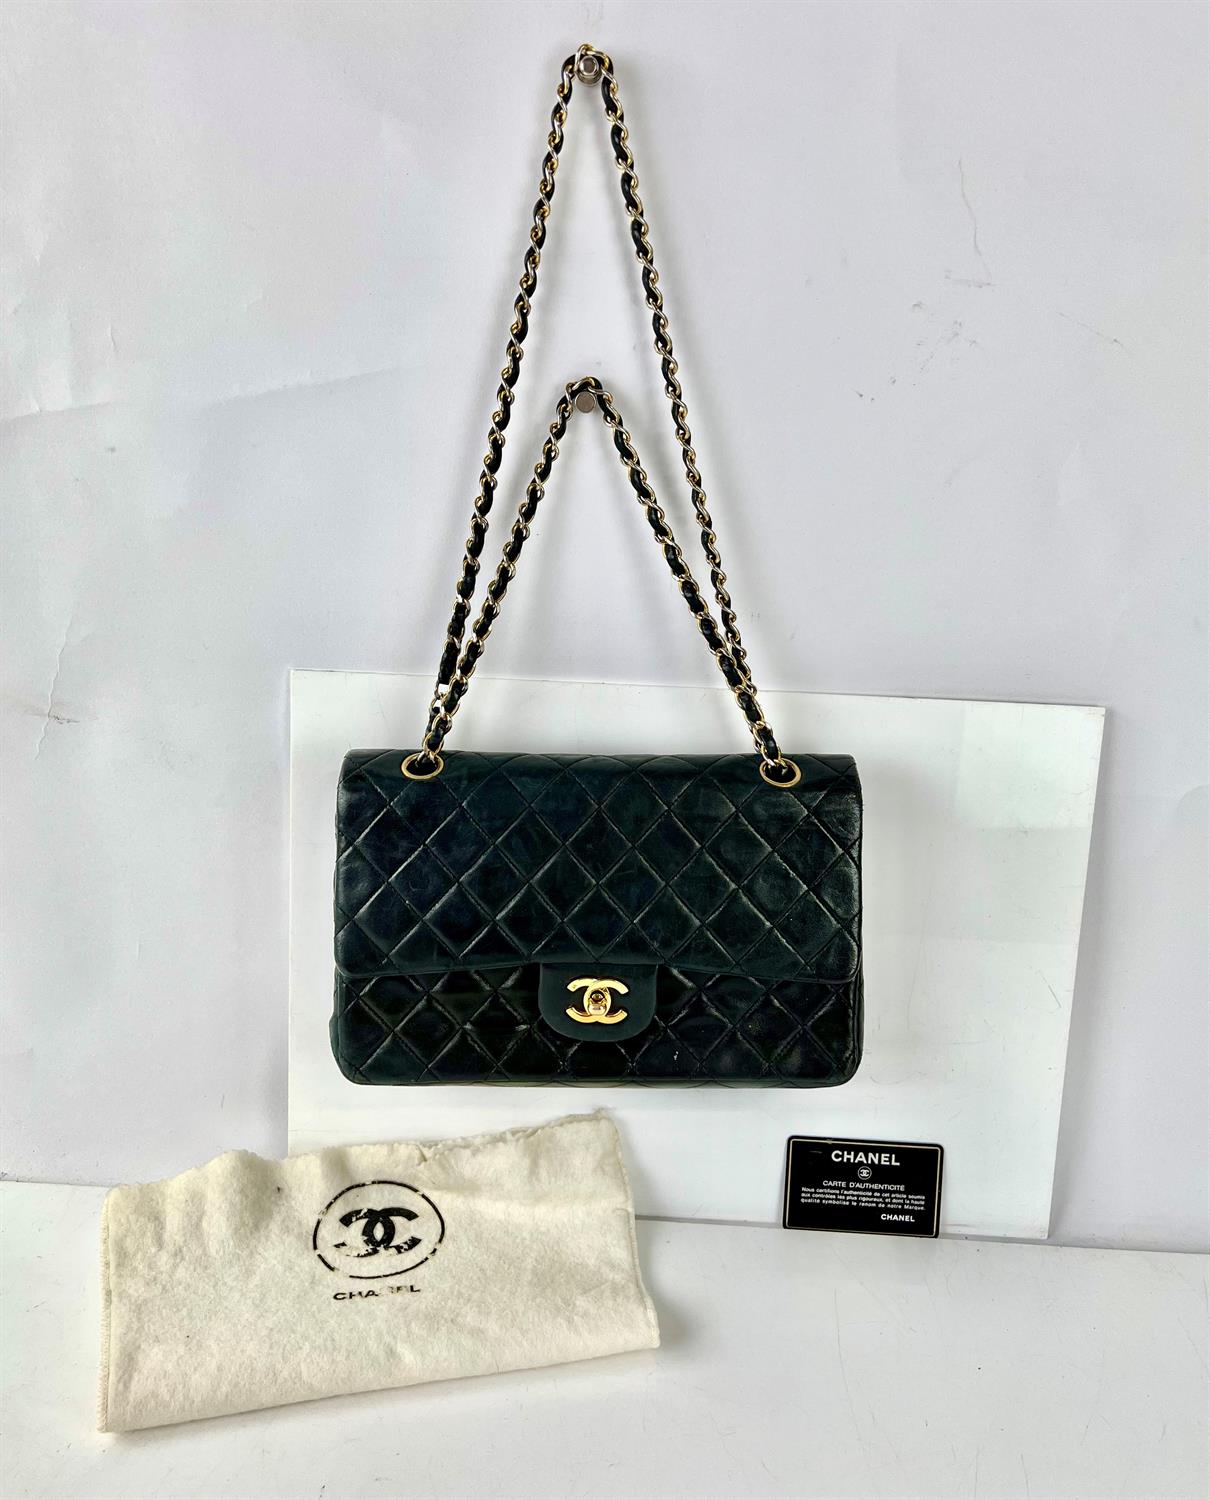 CHANEL vintage 1989-1991 black/dark quilted navy lambs leather double flap bag with gold hardware